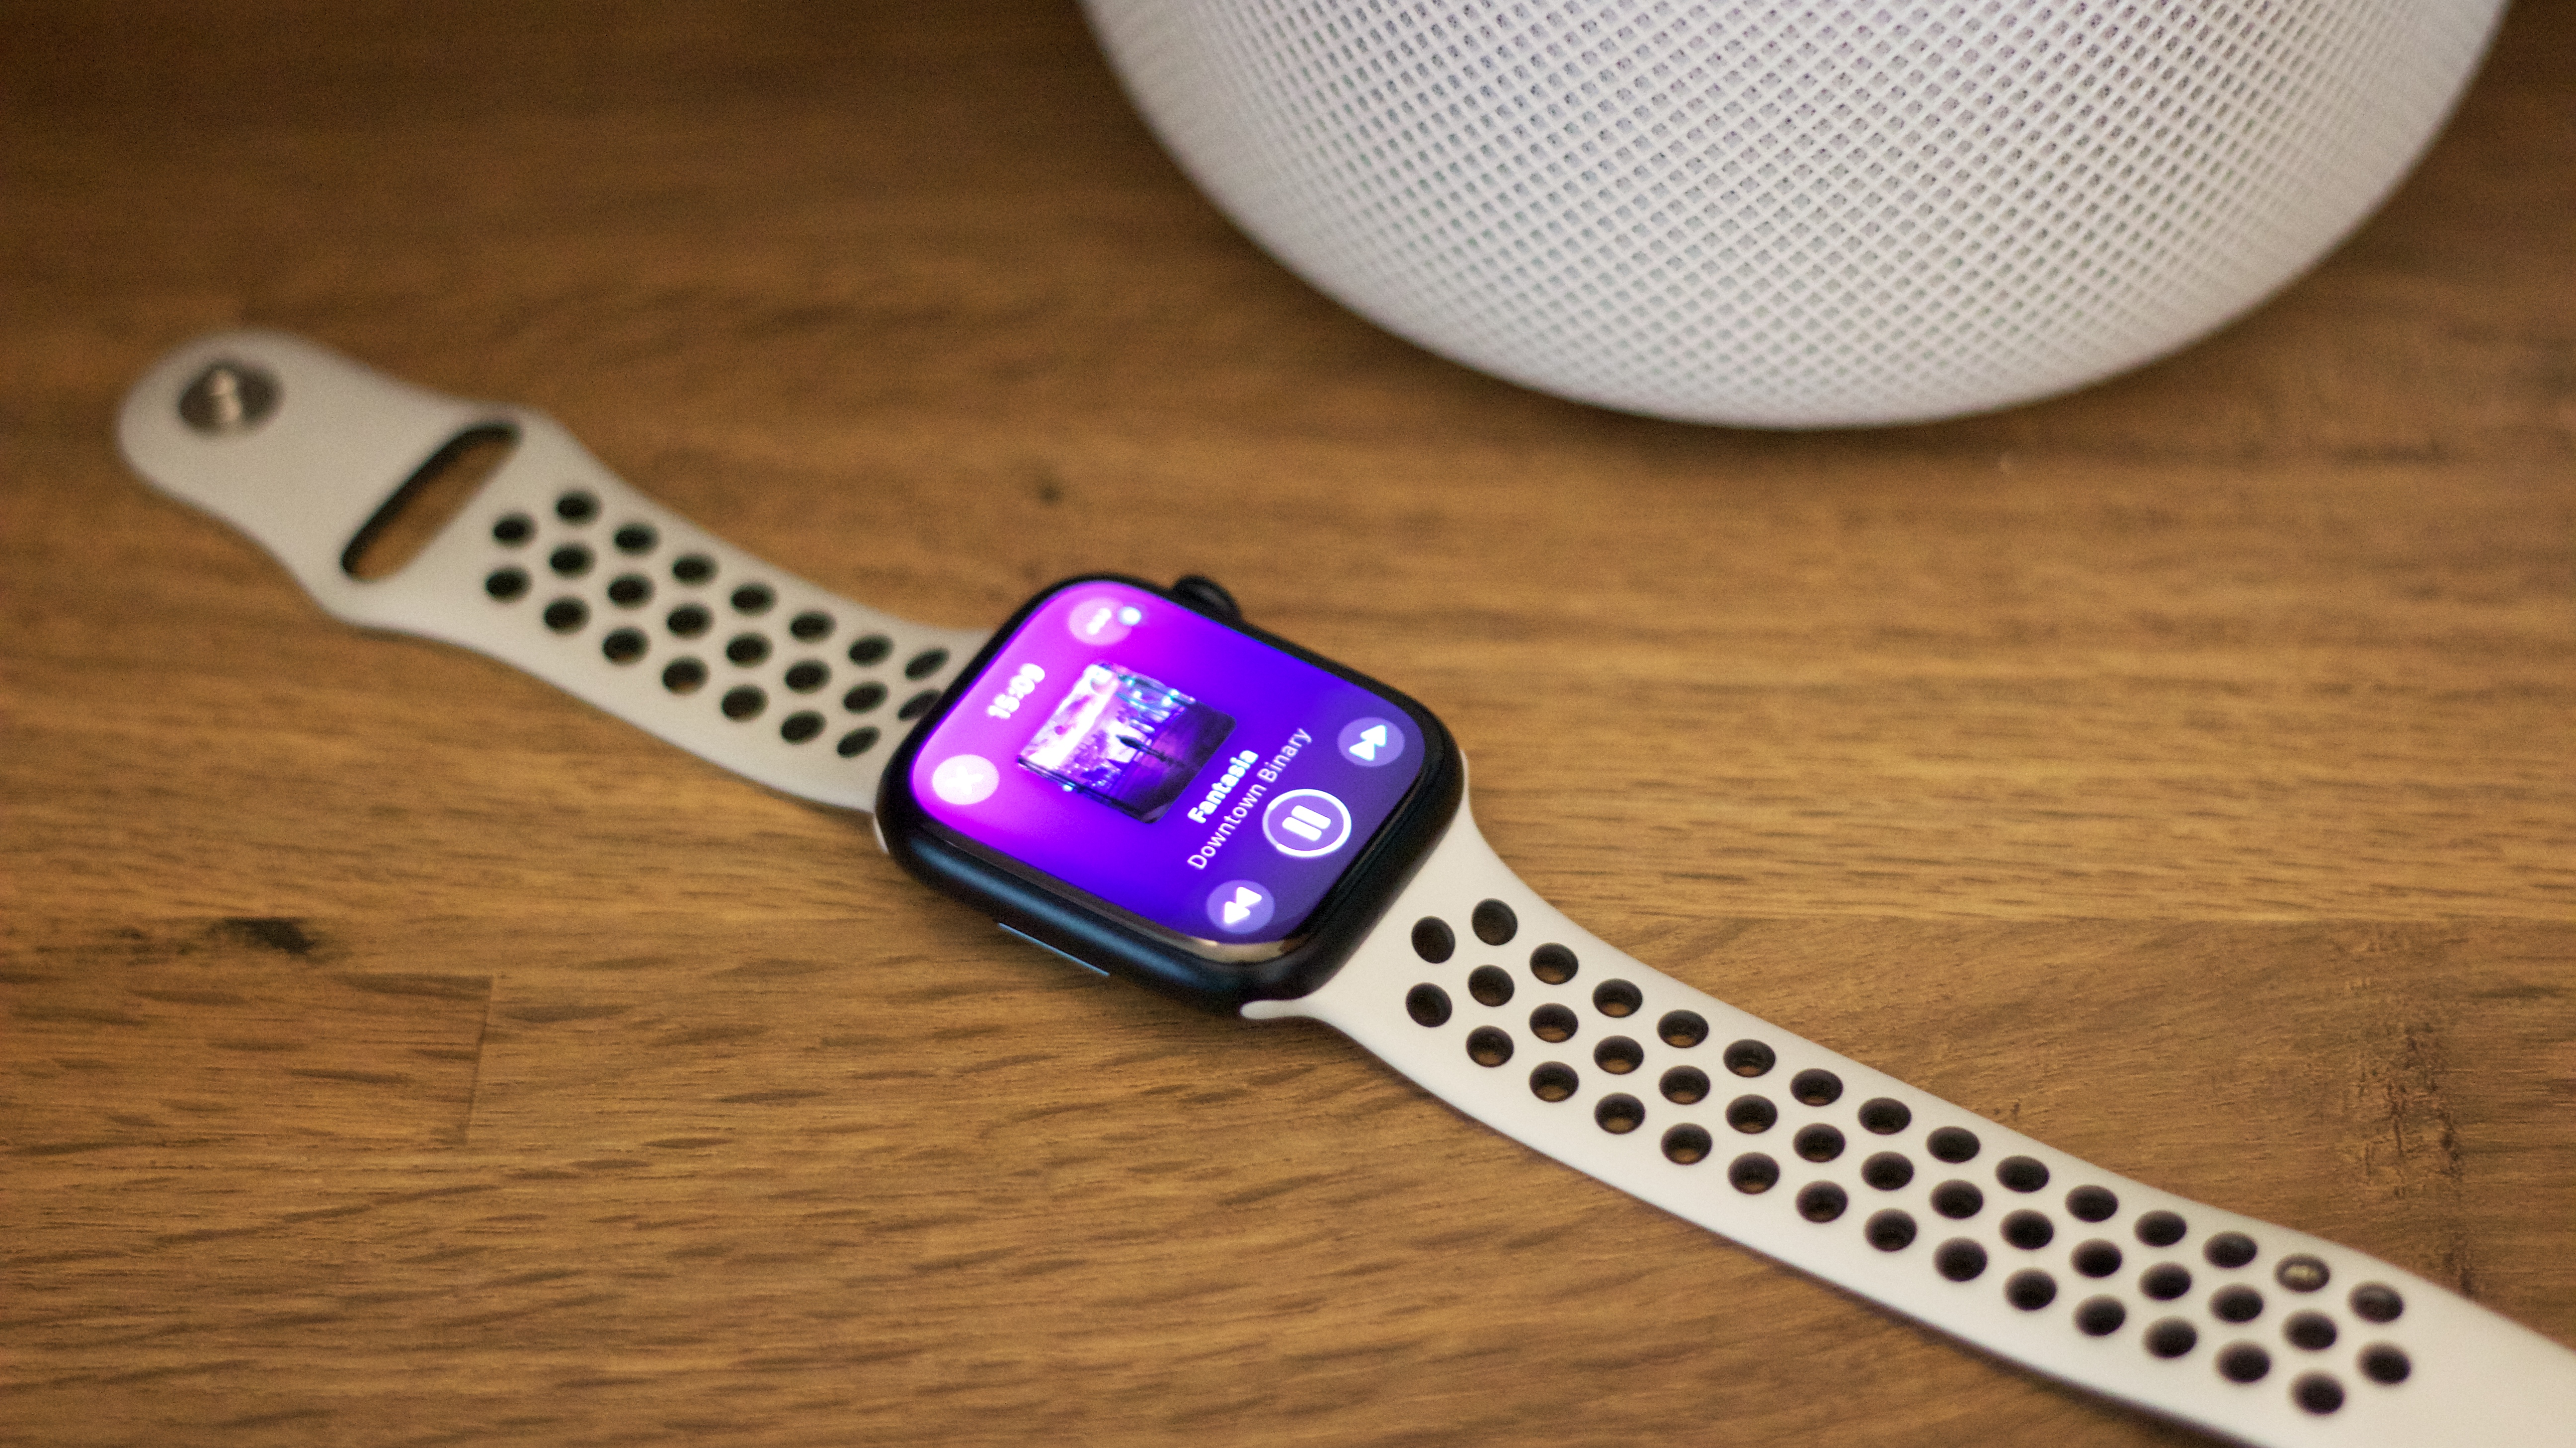 Pros & cons of Apple Watch discussed by health experts - 9to5Mac